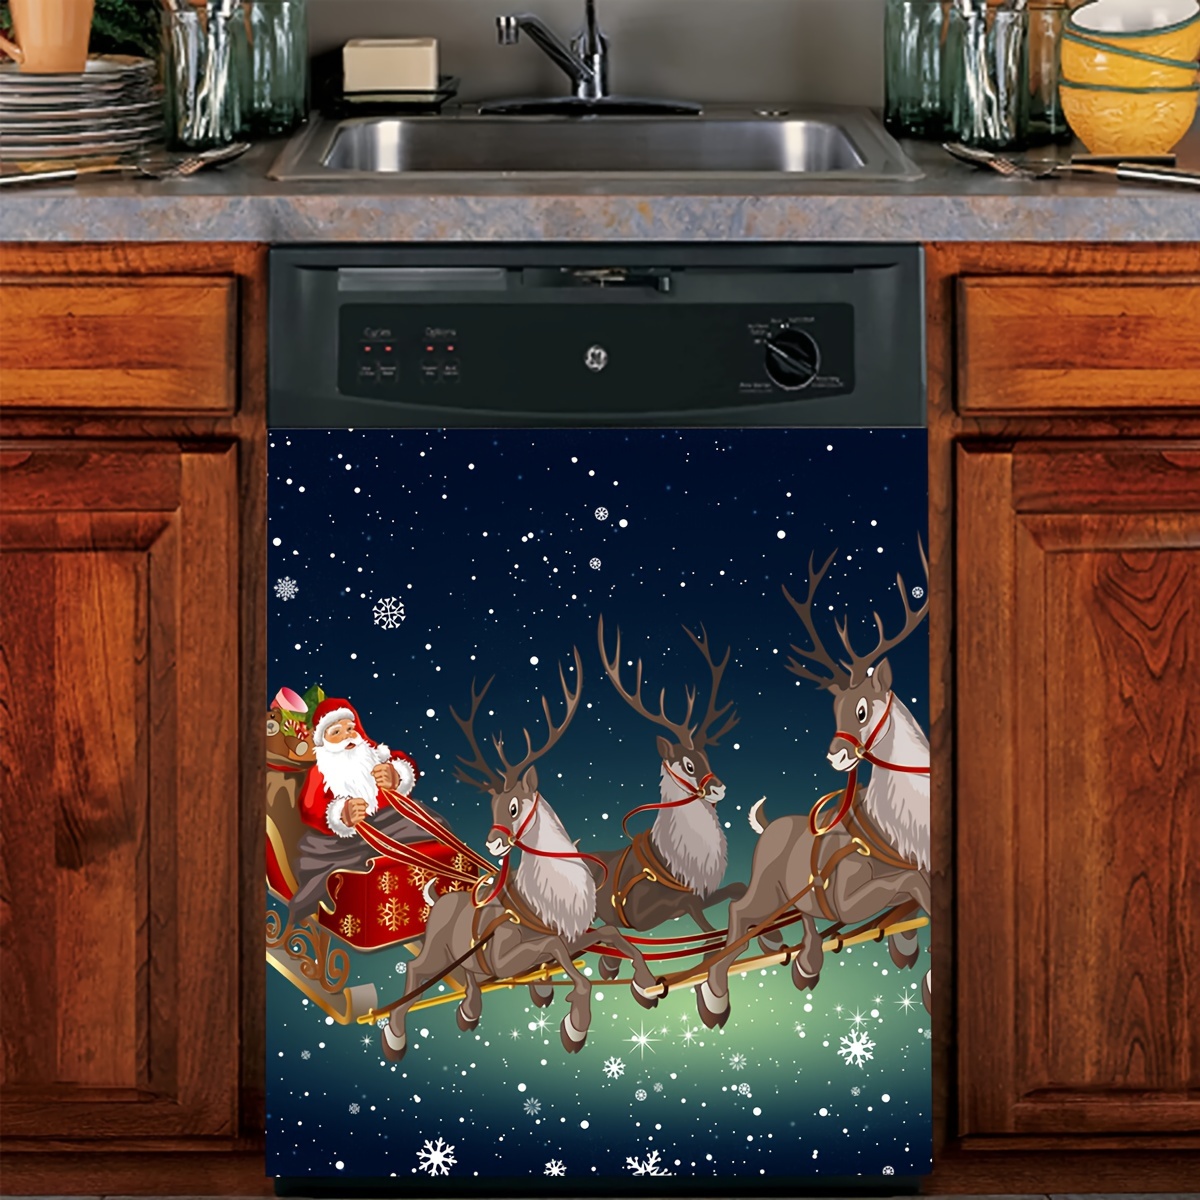  Magnetic Dishwasher Covers Gnome in Santa Claus Costume  Refrigerator Sticker Cover Fridge Covers Magnetic Skin Home Decor Kitchen :  Appliances